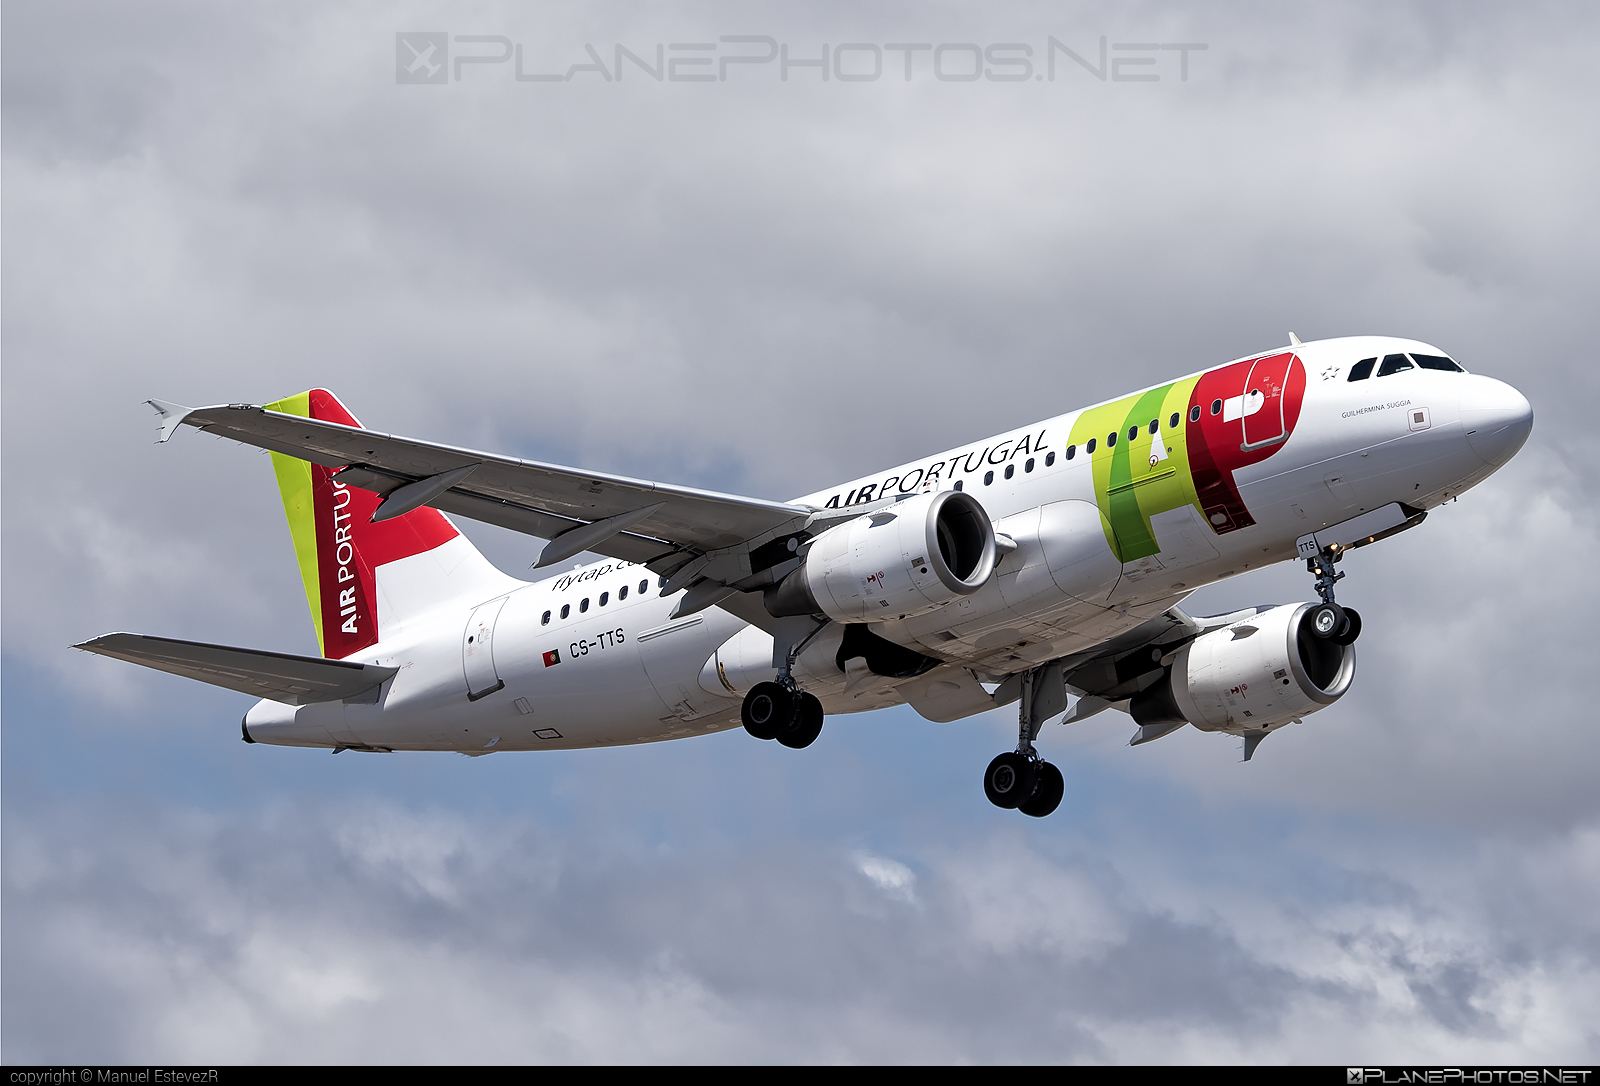 Airbus A319-112 - CS-TTS operated by TAP Portugal #a319 #a320family #airbus #airbus319 #tap #tapportugal